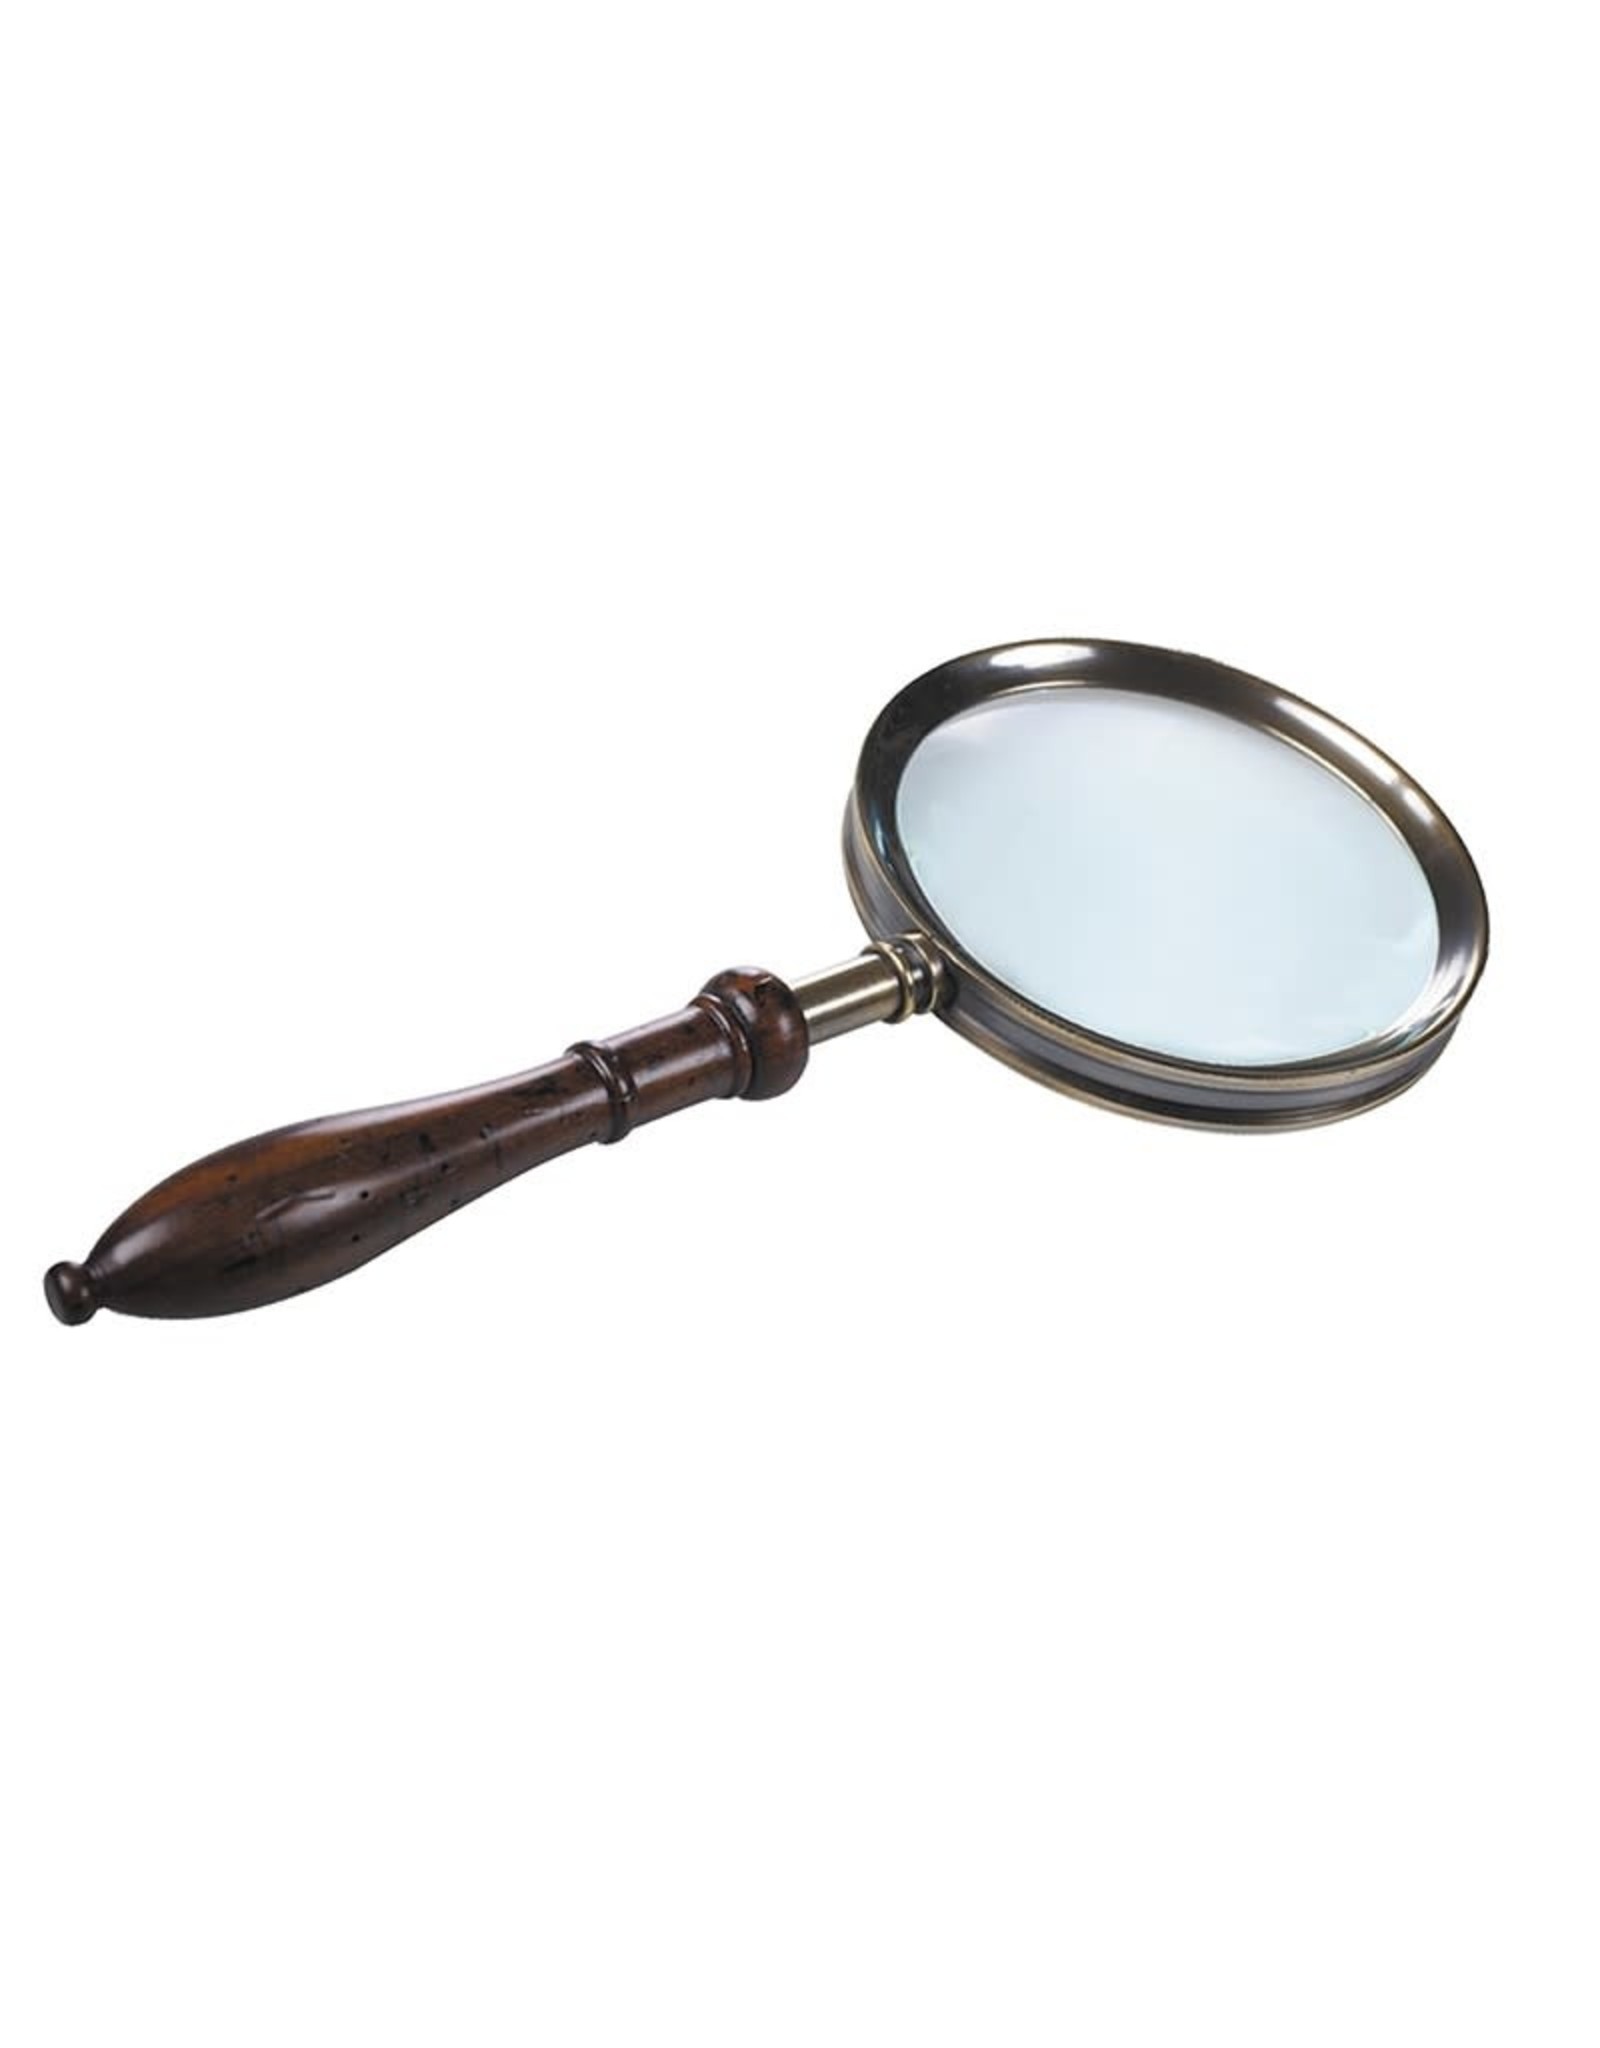 Authentic Models Regency Magnifying Glass